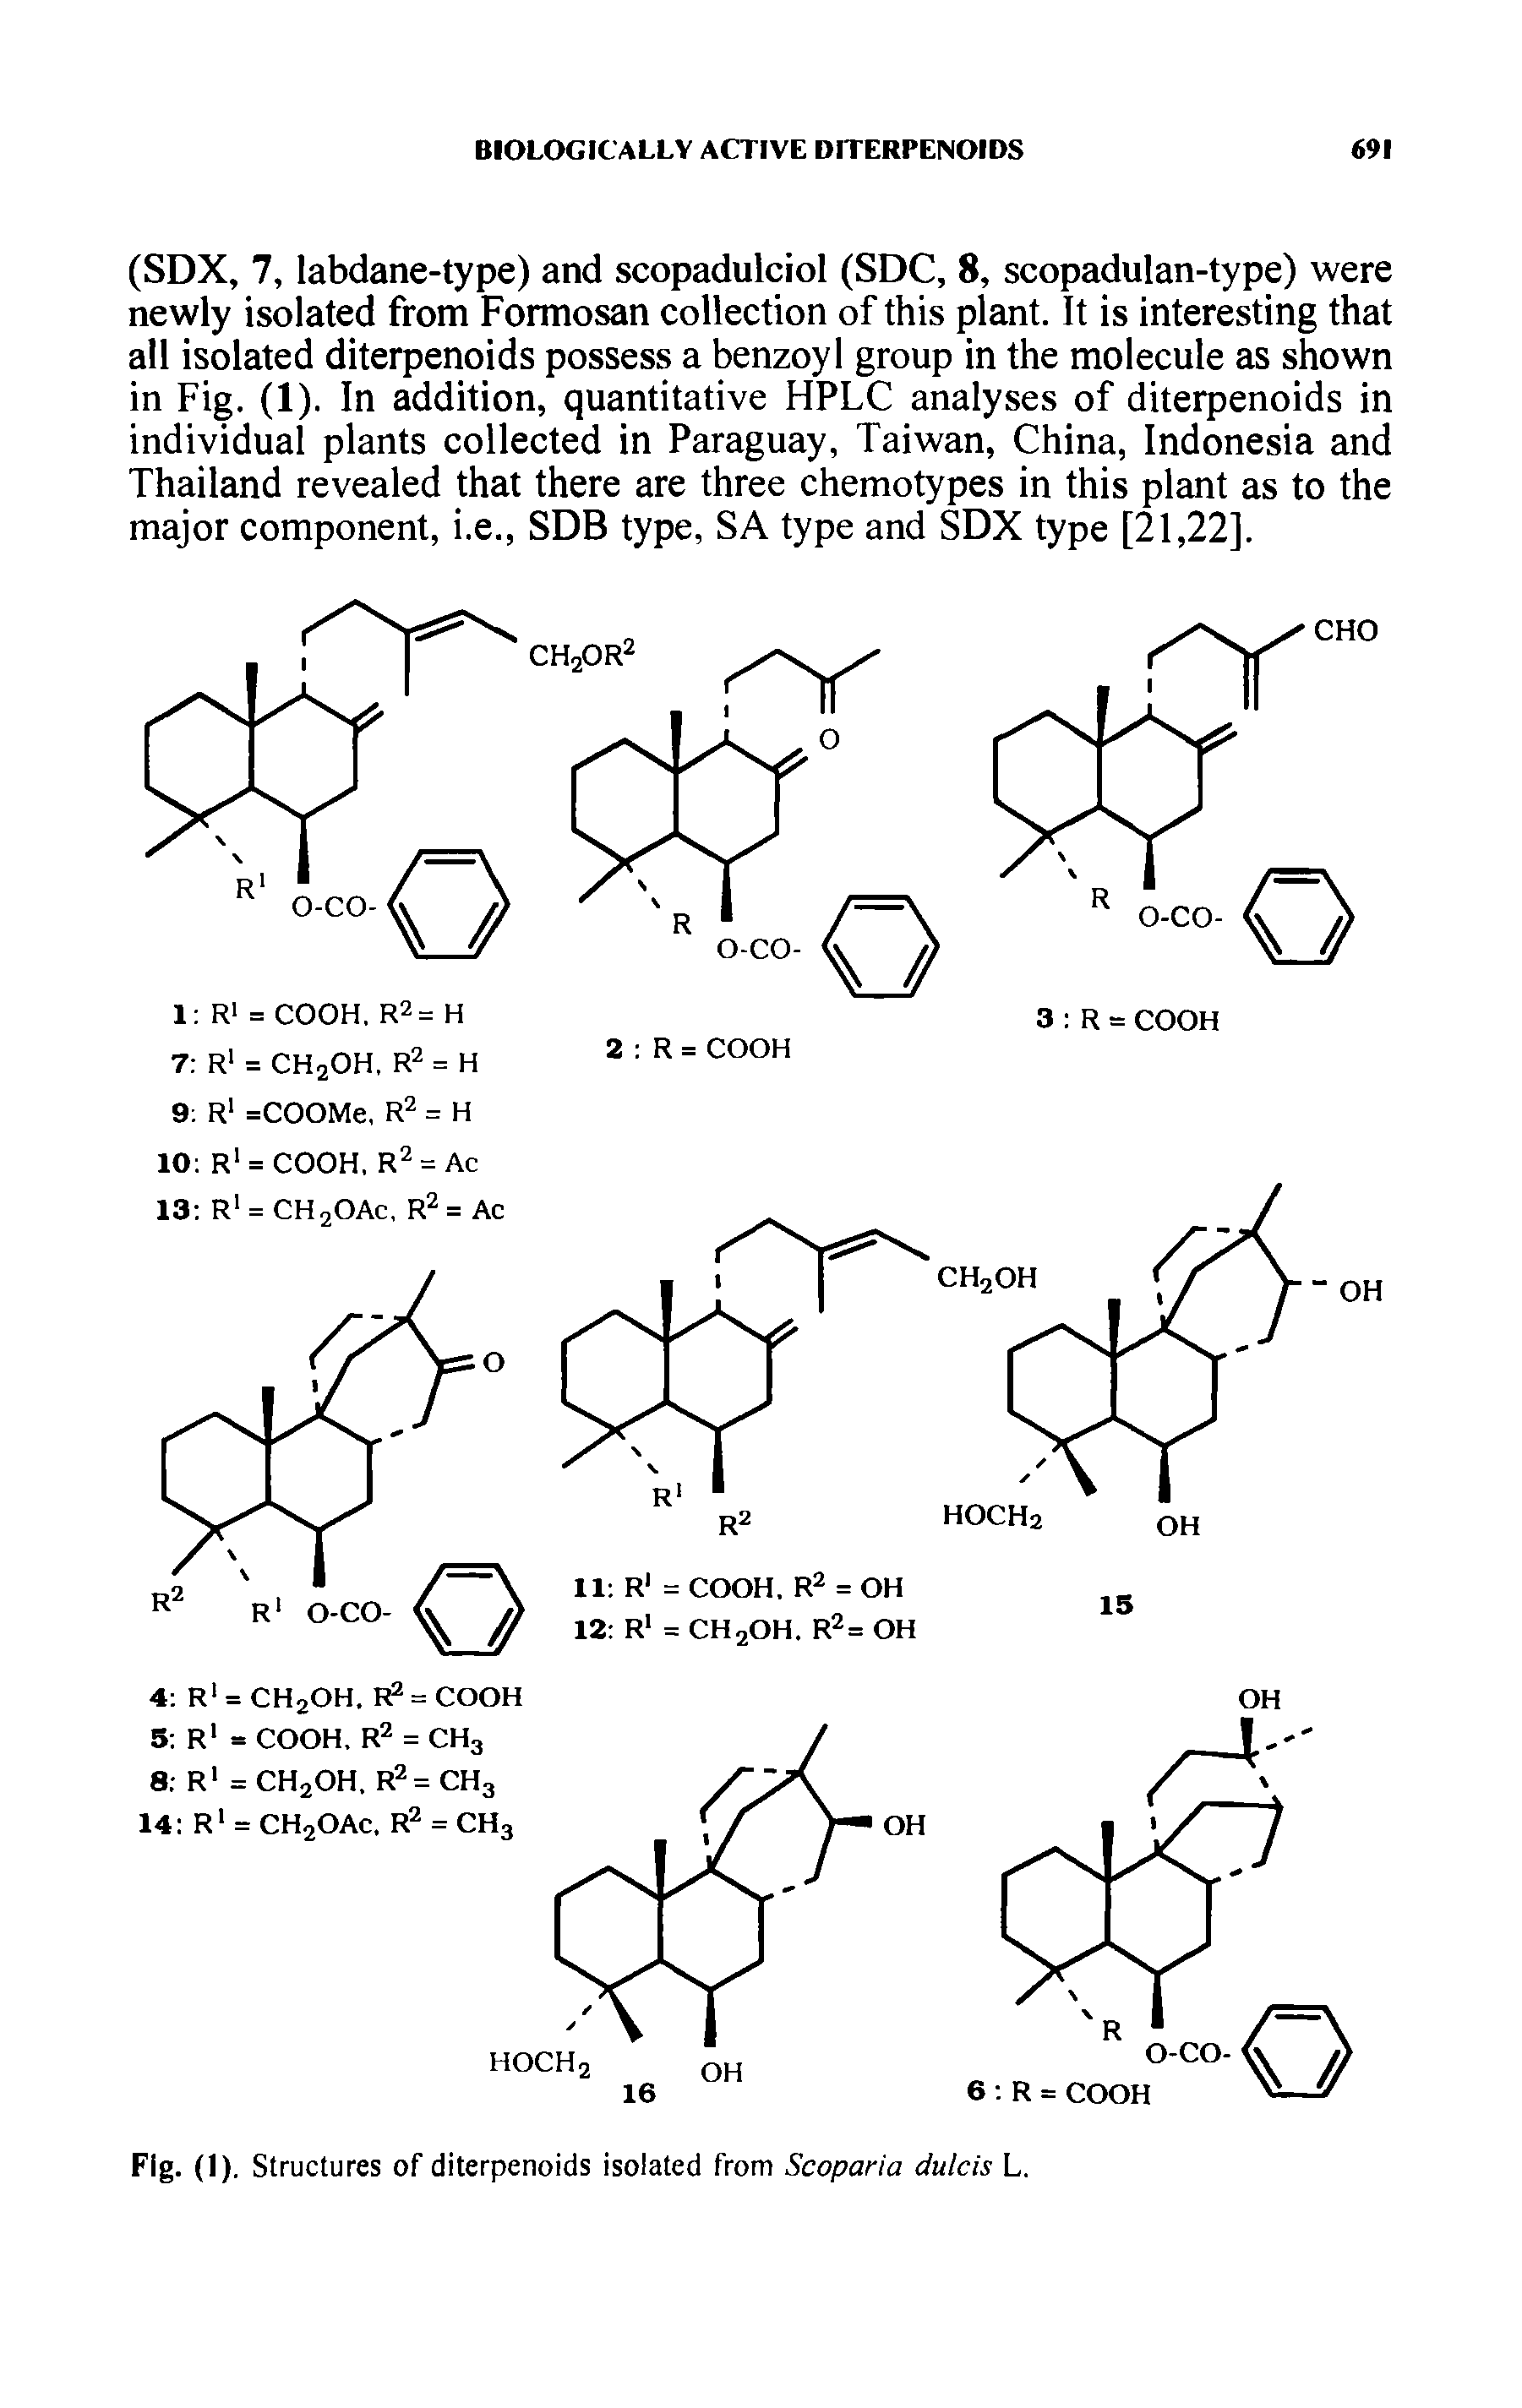 Fig. (1). Structures of diterpenoids isolated from Scoparia dulcis L.